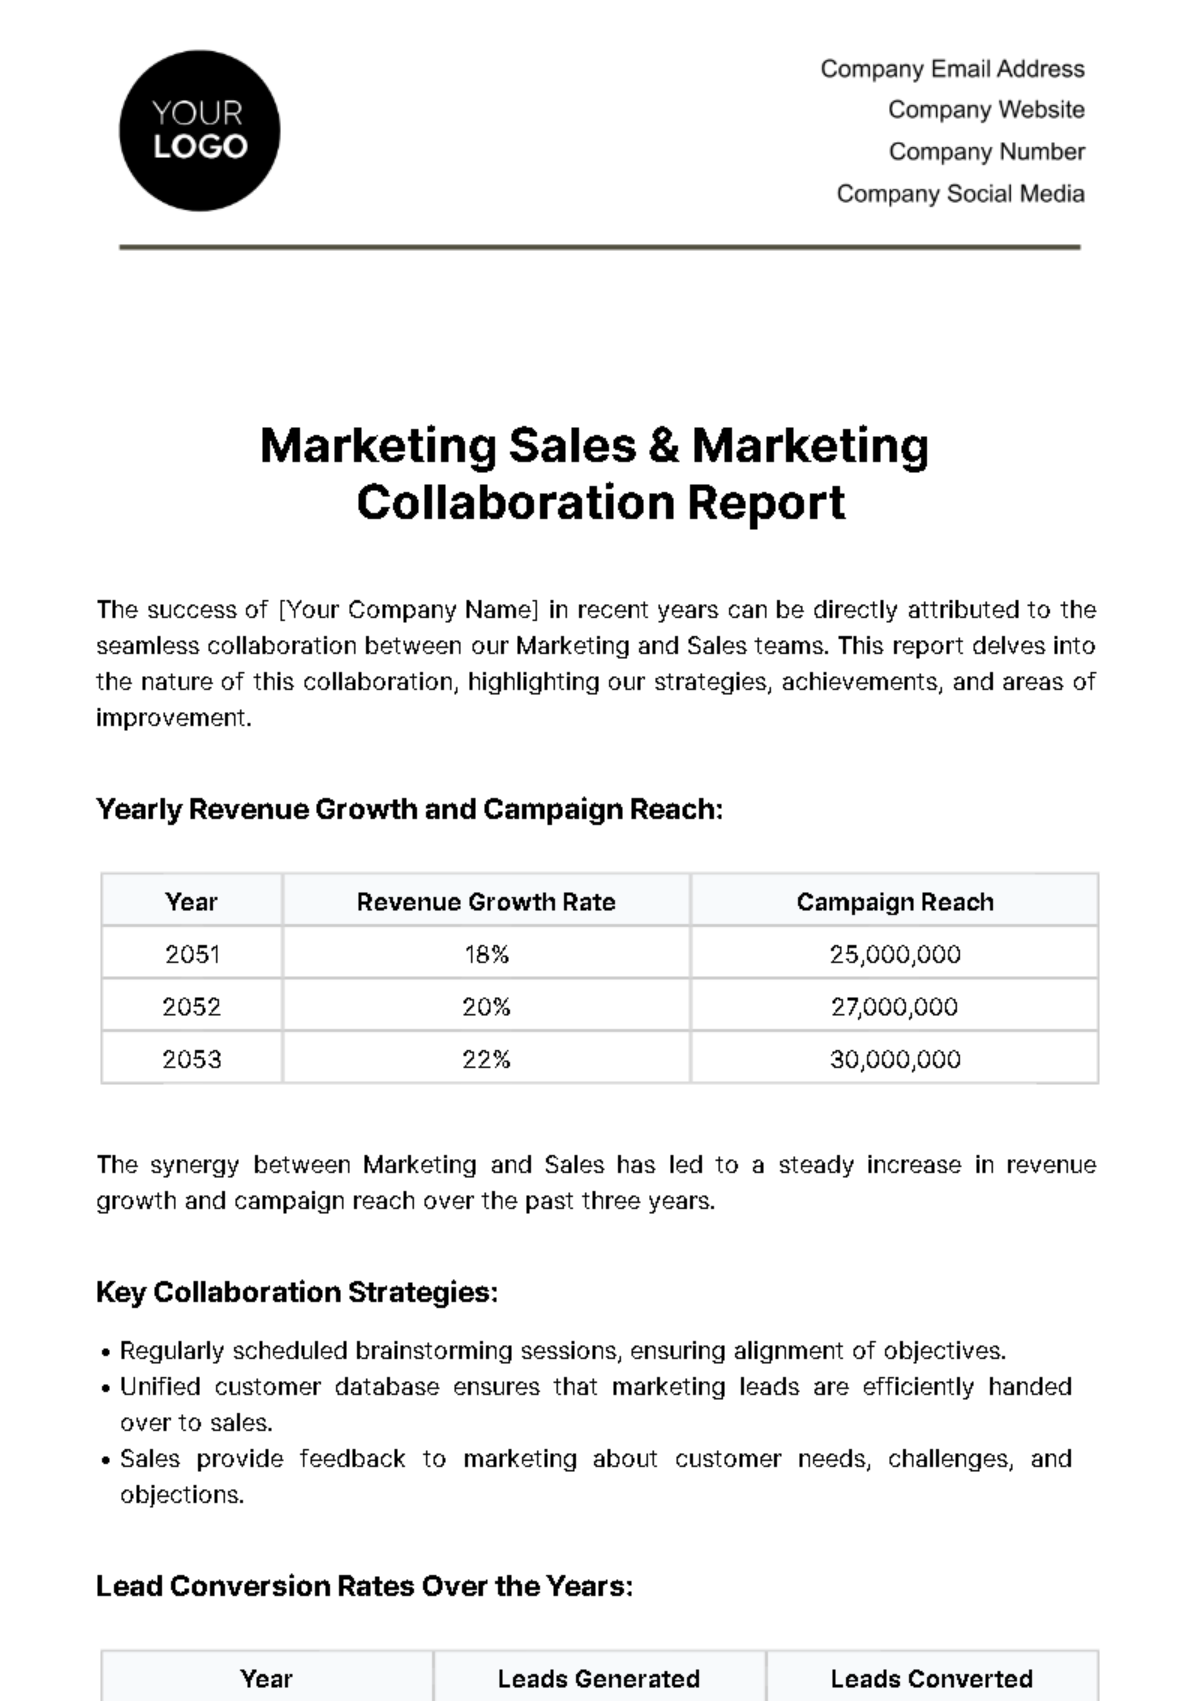 Free Marketing Sales & Marketing Collaboration Report Template